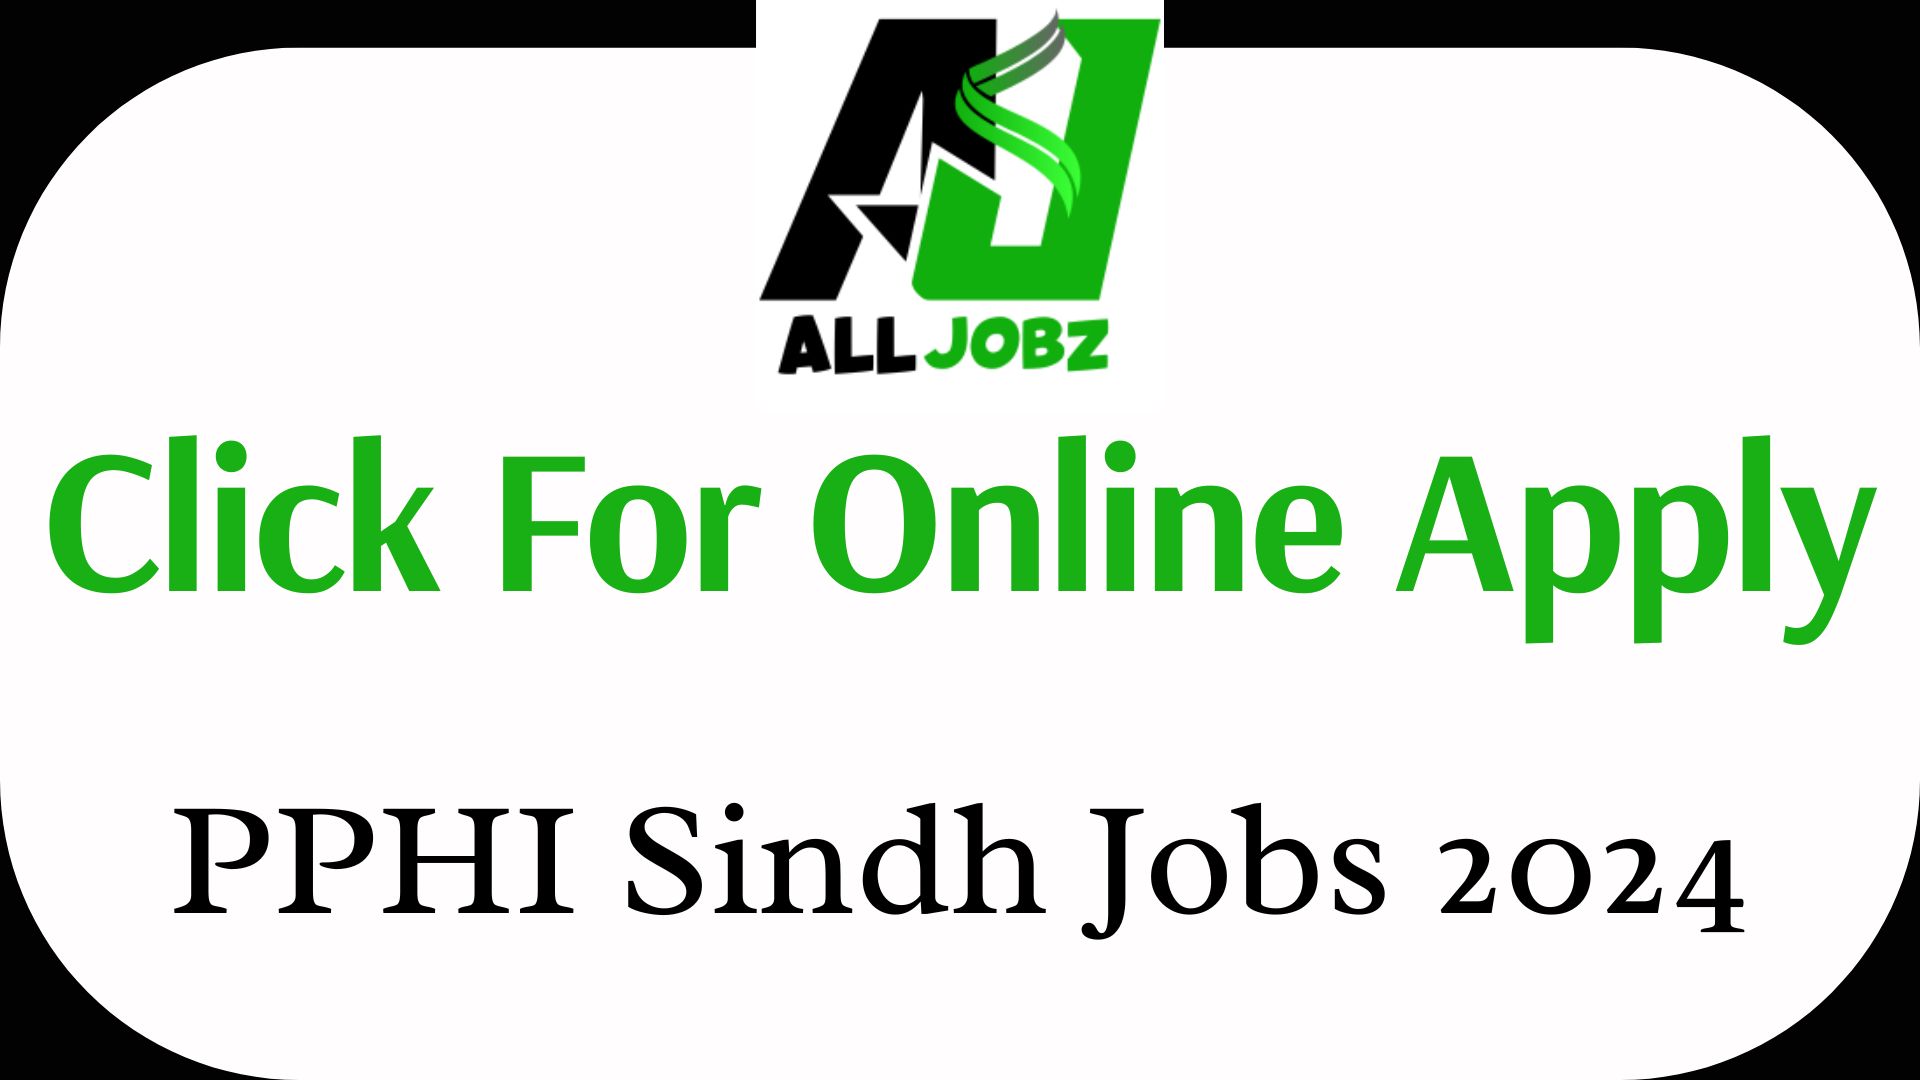 Job Opportunities At Pphi Sindh Online Apply, Pphi Sindh Jobs 2024 Last Date, Pphi Sindh Jobs 2024 Apply Online, Pphi Sindh Jobs In Karachi, Pphi Sindh Jobs Online Apply, Pphi Sindh Jobs 2024, Pphi Sindh Jobs Salary, Pphi Job Portal, Pphi Sindh Online Apply, Pphi Sindh Jobs 2024 Karachi, Pphi Job Portal Login, Pphi Sindh Login, Pphi Login With Cnic Online Apply, Pphi Job Portal Login With Cnic, Pphi Job Portal Result,